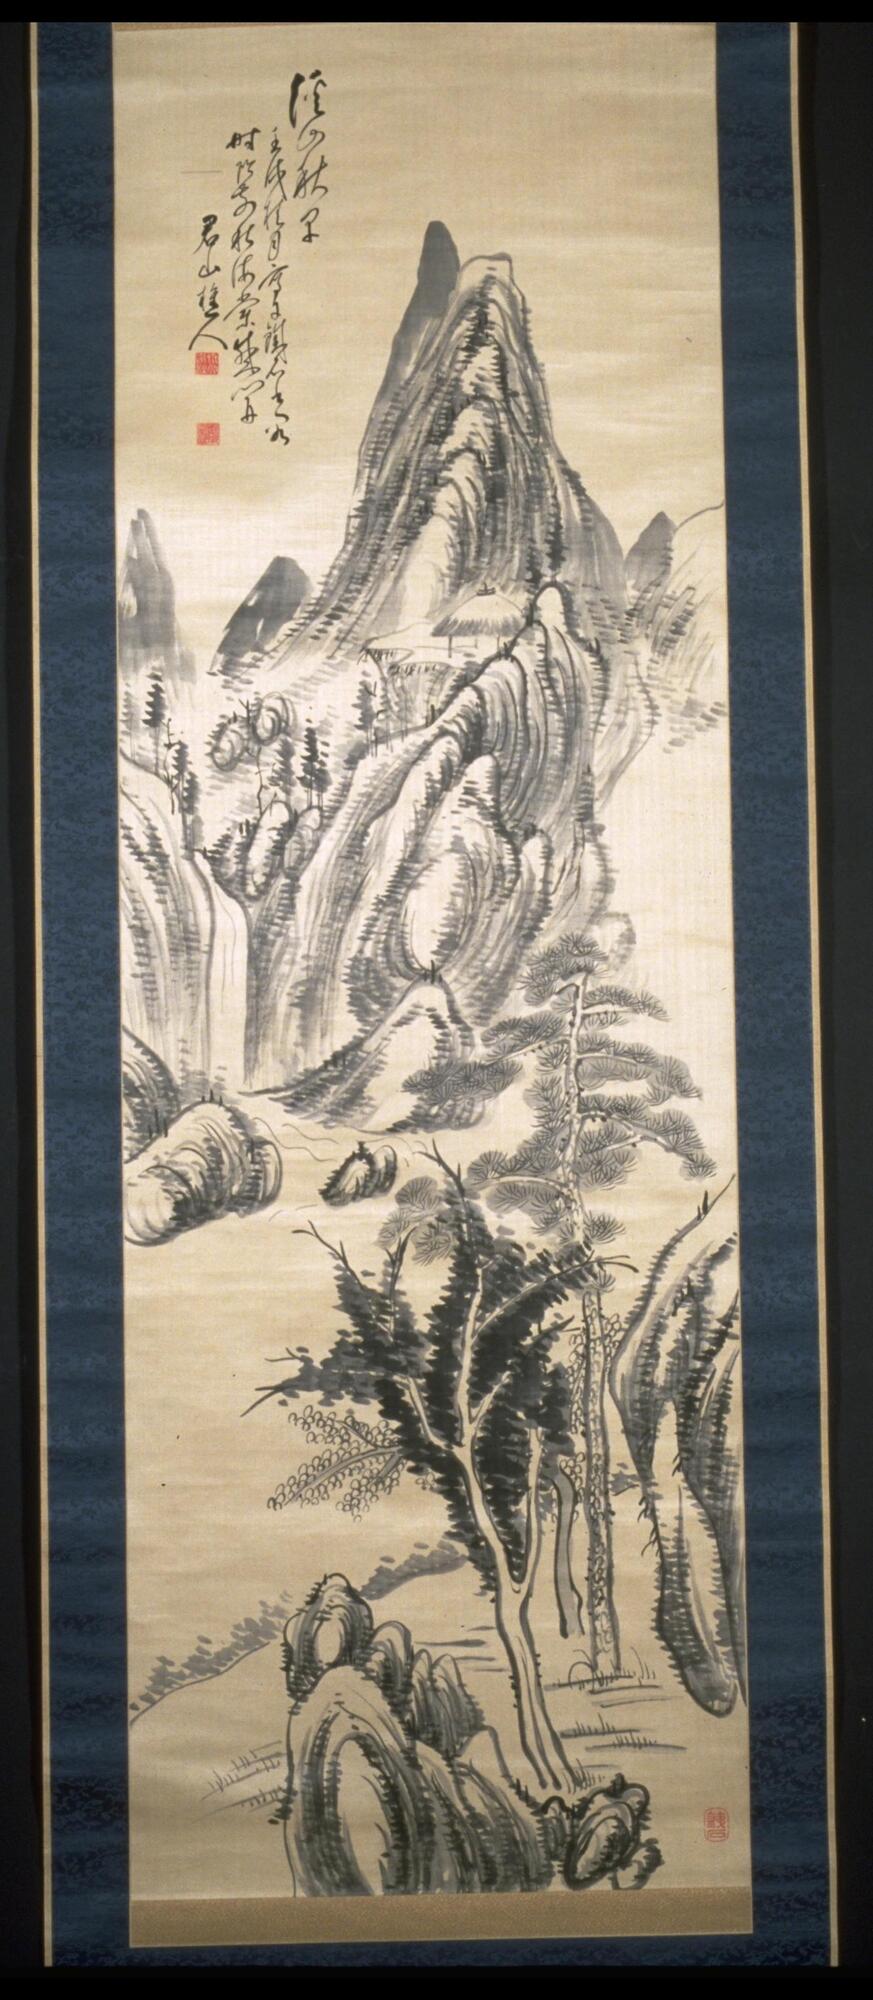 There is a mountain in the background with a waterfall pouring out of it and flowing into a river. On the opposite shore of the mountains, there are rocks and trees. There is an inscription and seal in the top left corner of the hanging scroll. The hanging scroll is bordered with blue.